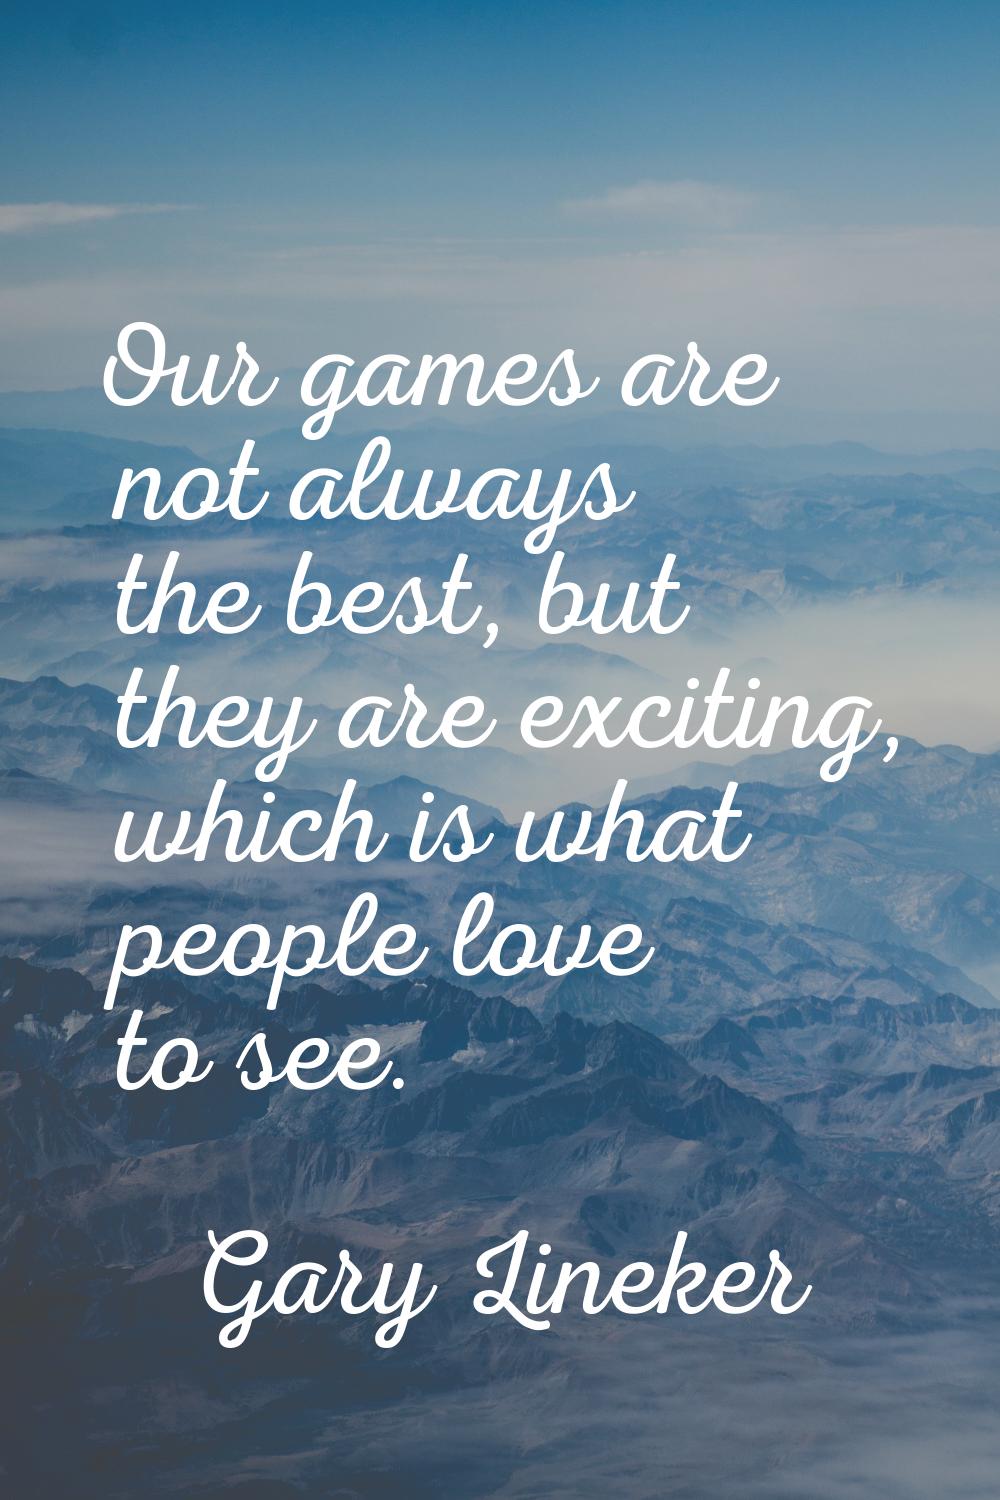 Our games are not always the best, but they are exciting, which is what people love to see.